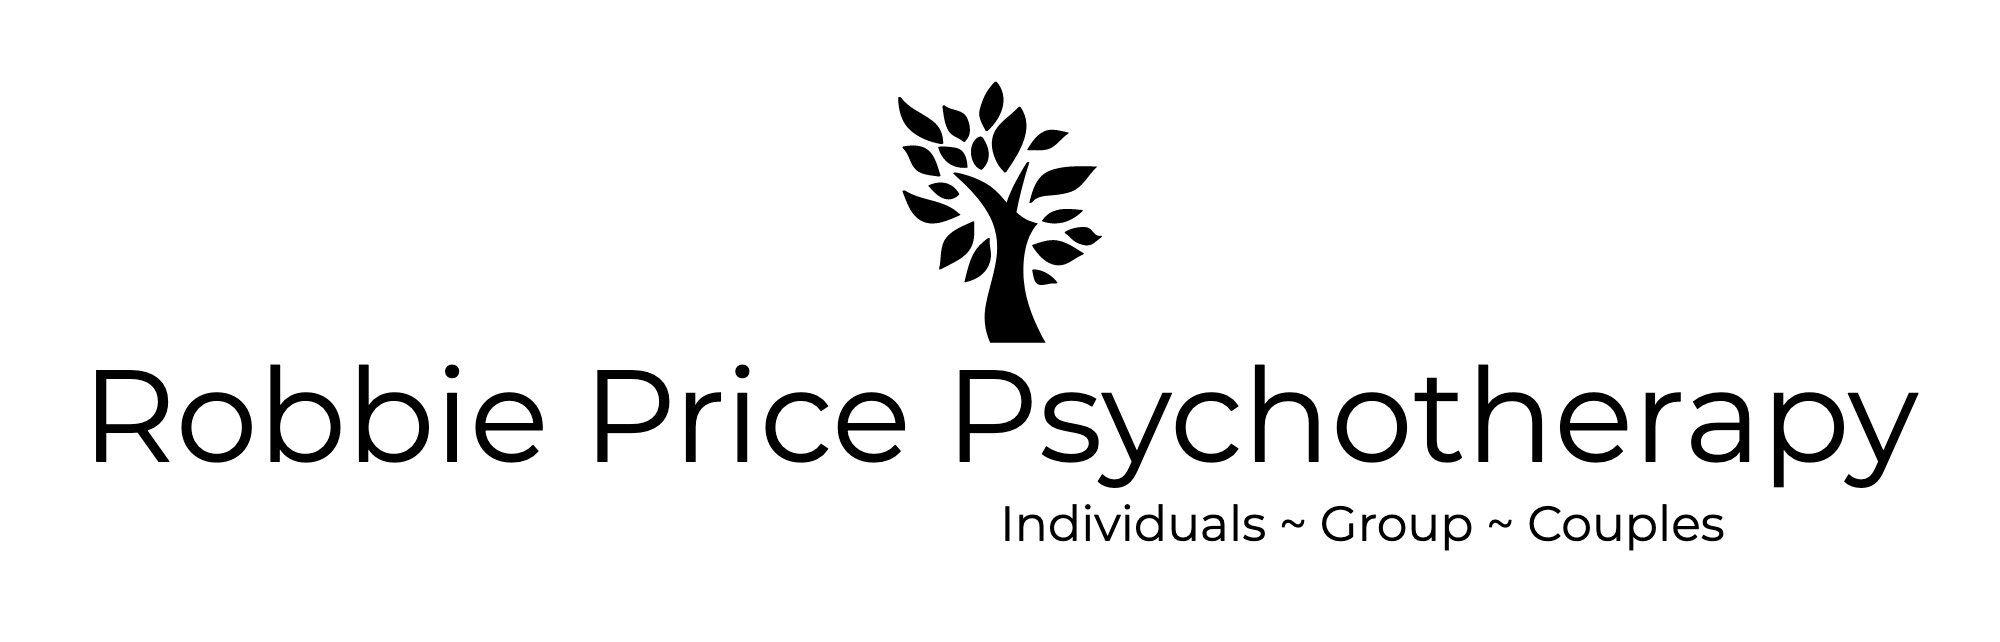 Robbie Price Psychotherapy